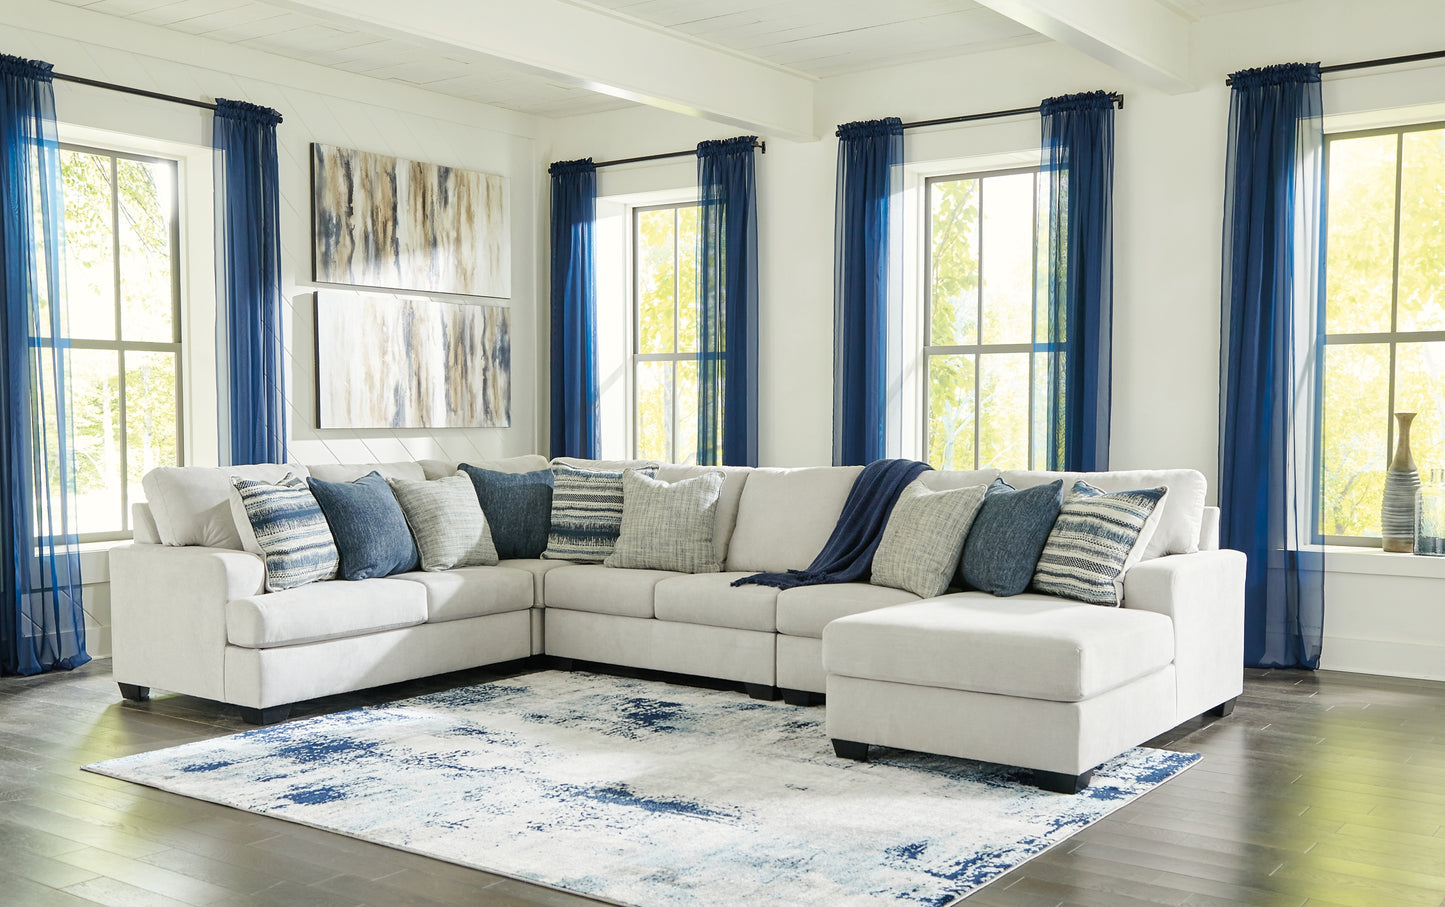 Lowder 5-Piece Sectional with Ottoman